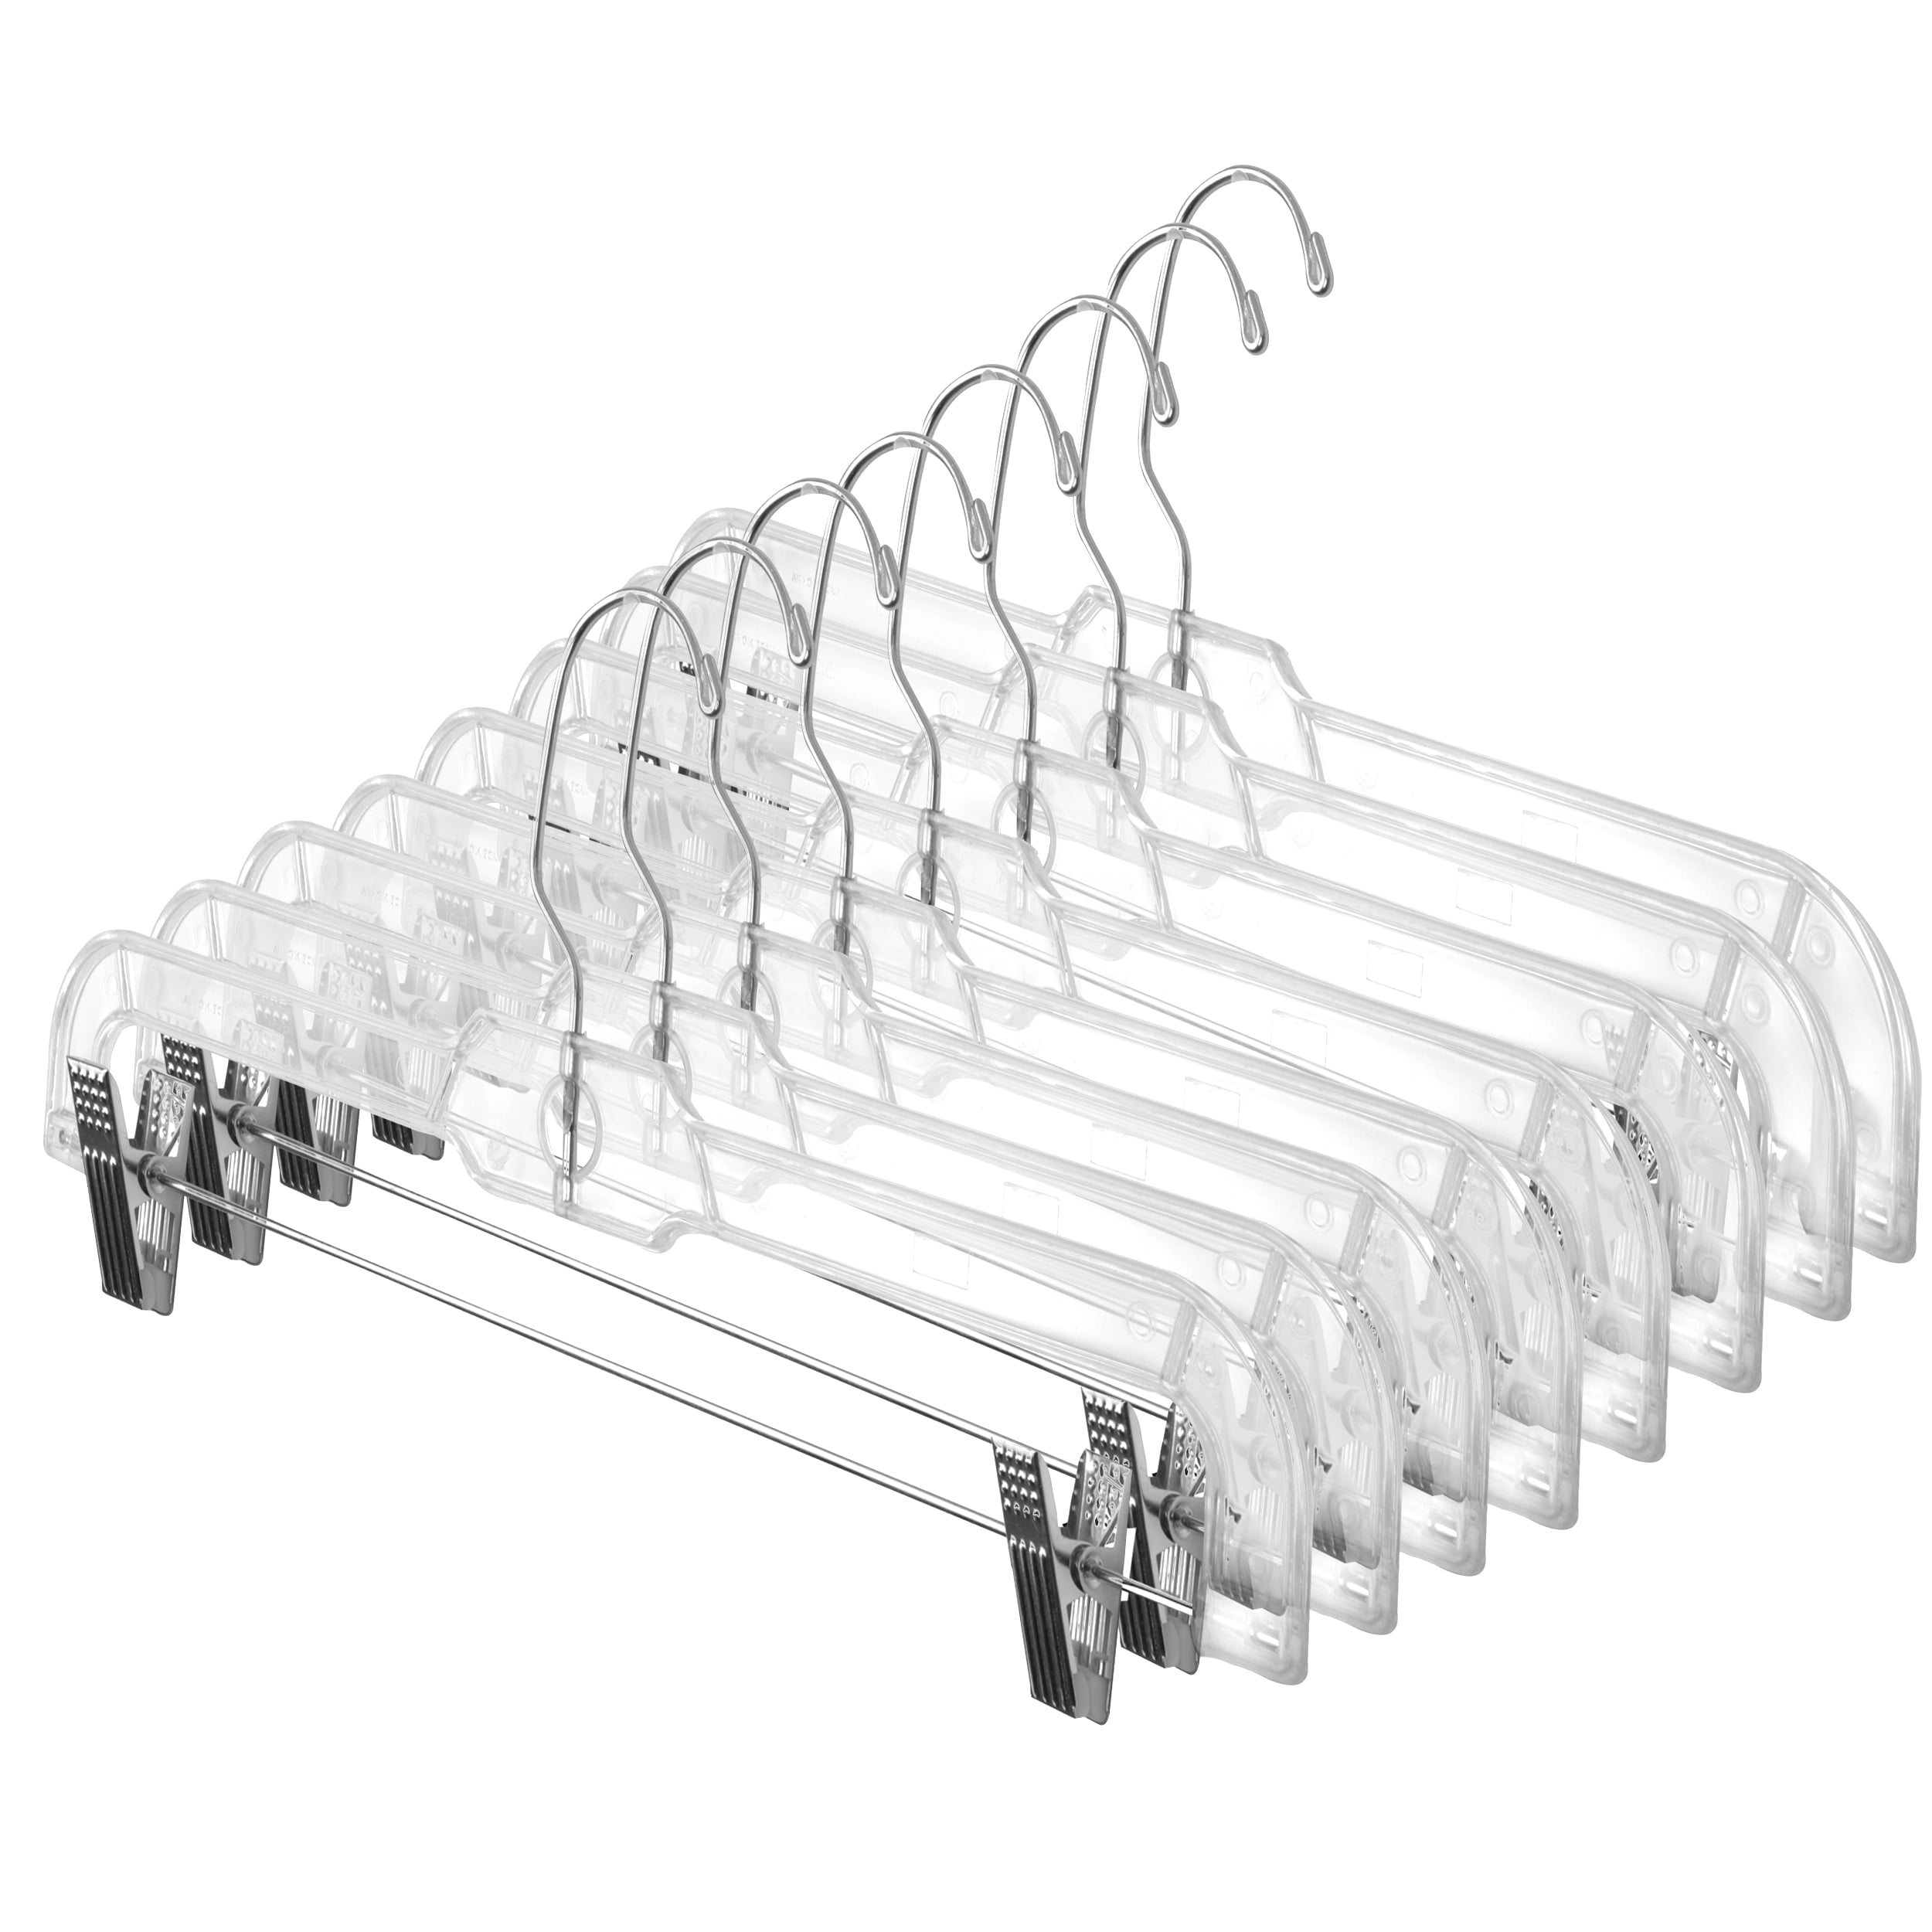 Aizhy Trouser Hanger Strong Chrome Skirt Coat Hangers with Non-Slip Clips 28cm 11 ,Pack of 20 